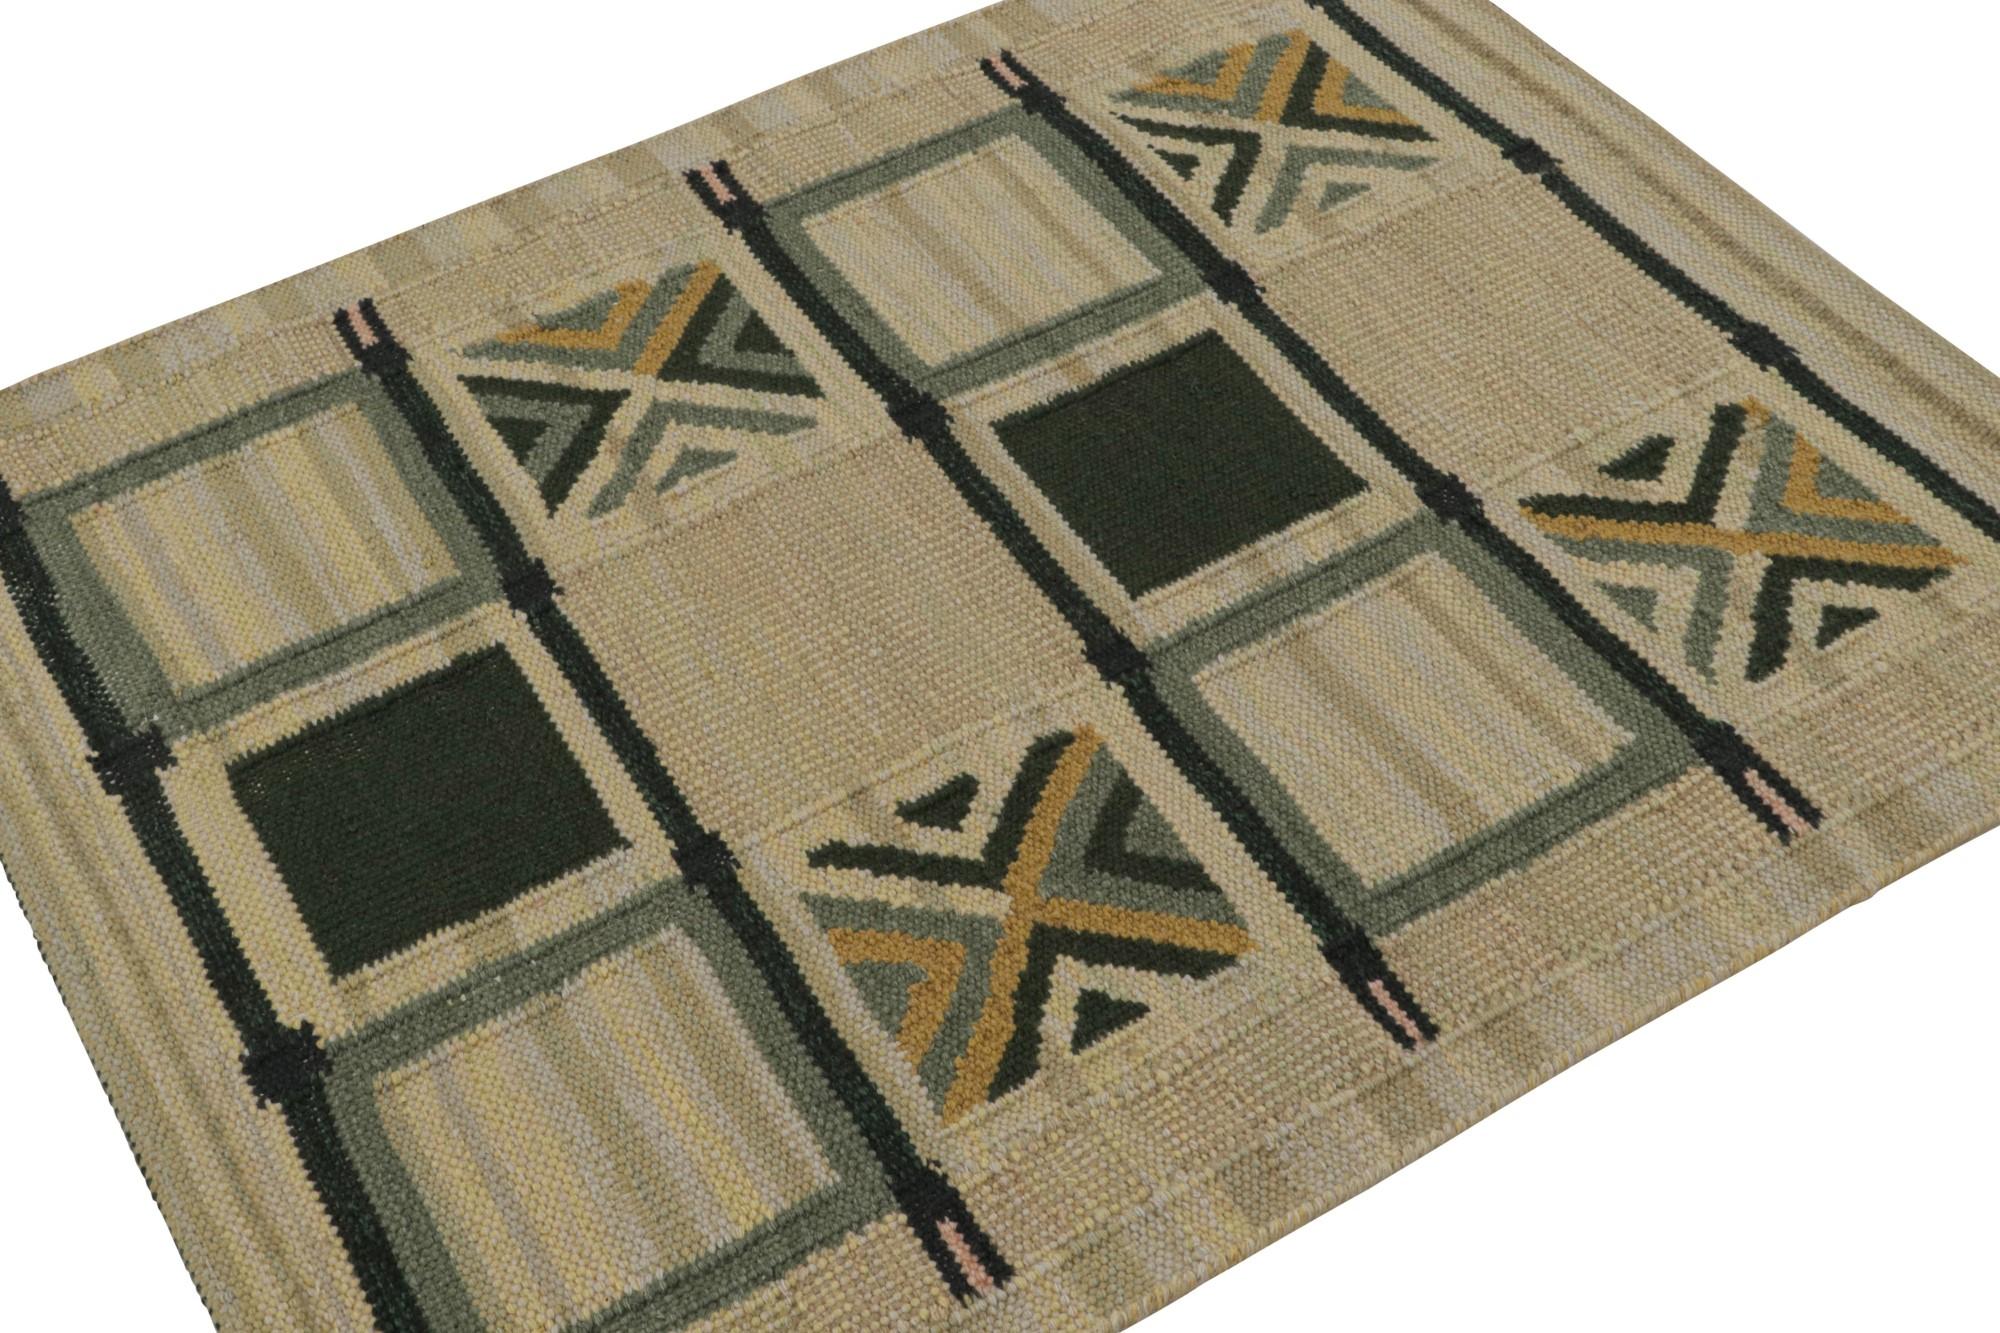 A custom 4x5 Swedish style kilim from our award-winning Scandinavian flat weave collection. Handwoven in wool, cotton & undyed natural yarns.

On the Design: 

This scatter rug enjoys geometric patterns in beige, gold & green. Keen eyes will admire